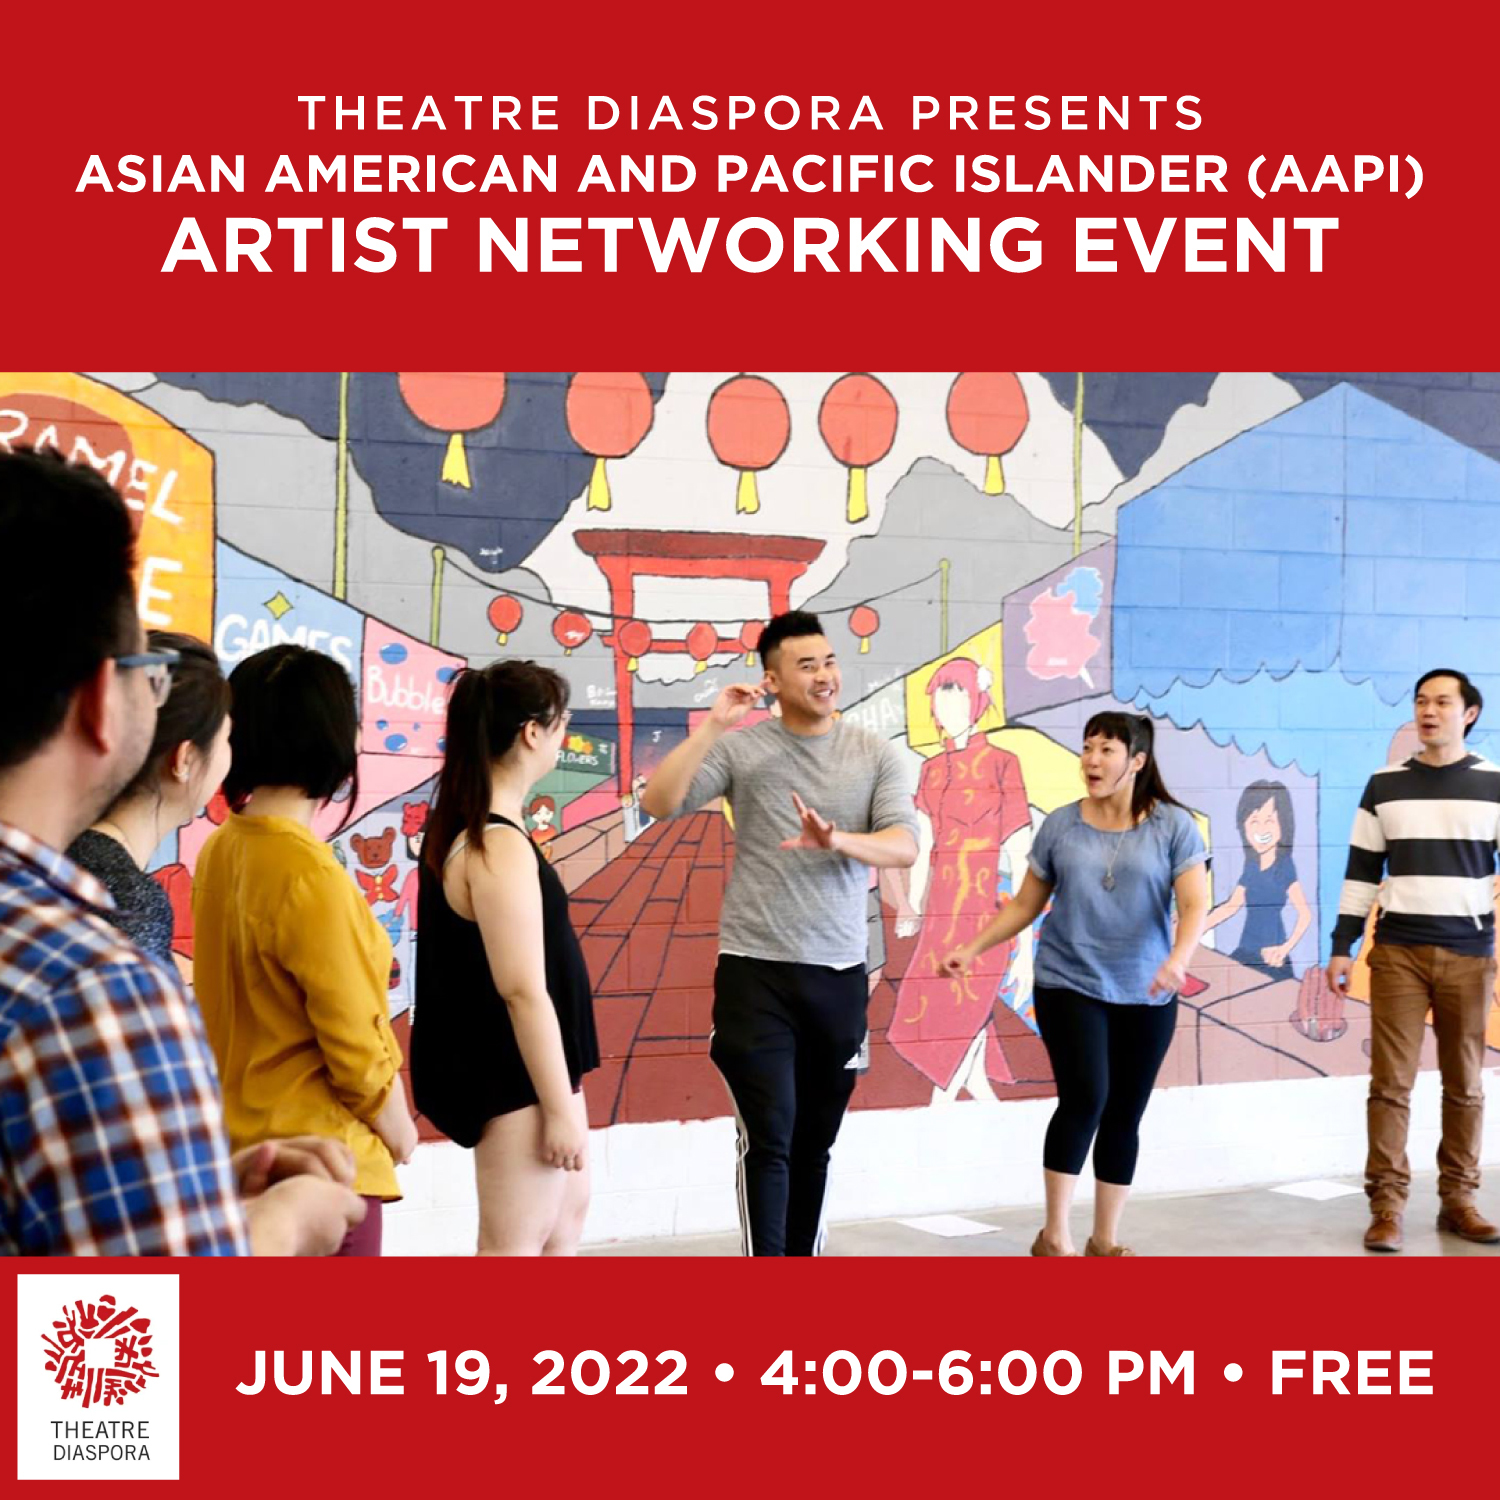 Preview image for Theatre Diaspora Presents: Asian American and Pacific Islander (AAPI) Artist Networking Event